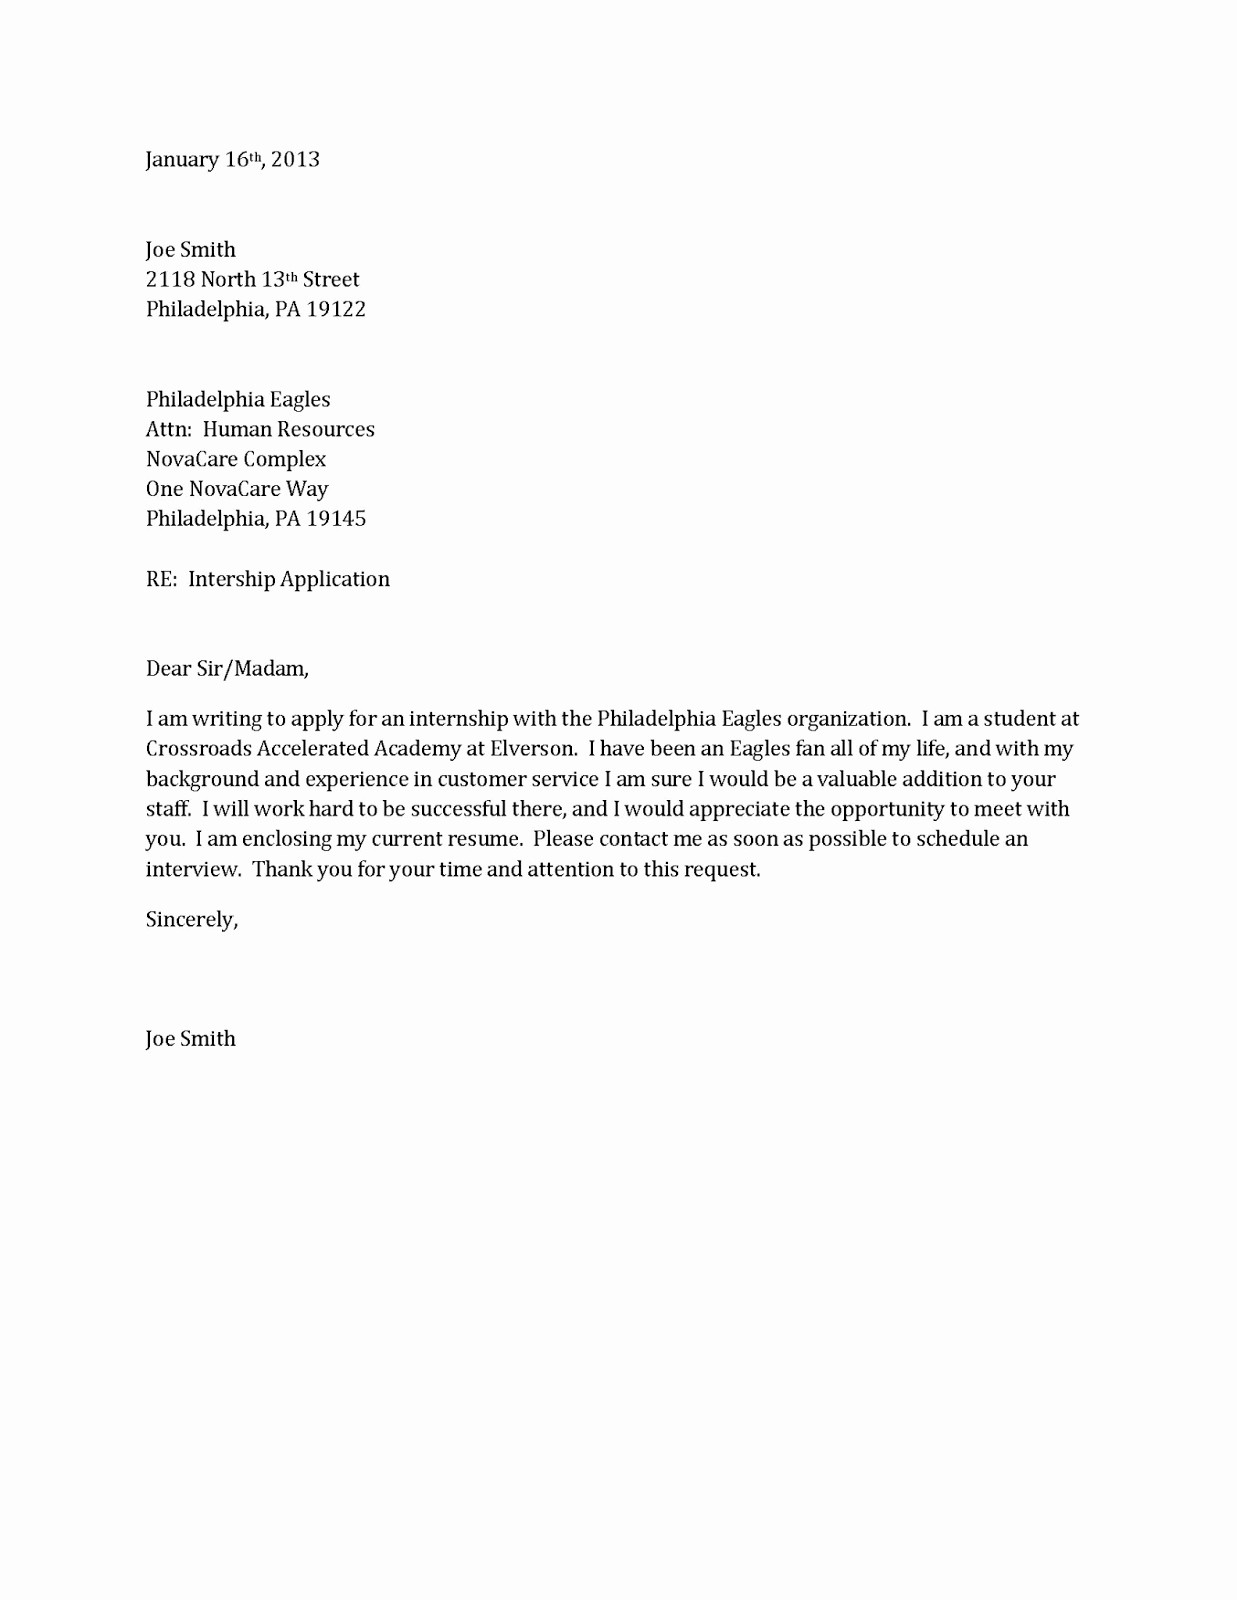 Free Cover Letters for Resumes Best Of Free Blank Resum Resume Cover Letter Example Resume Cover